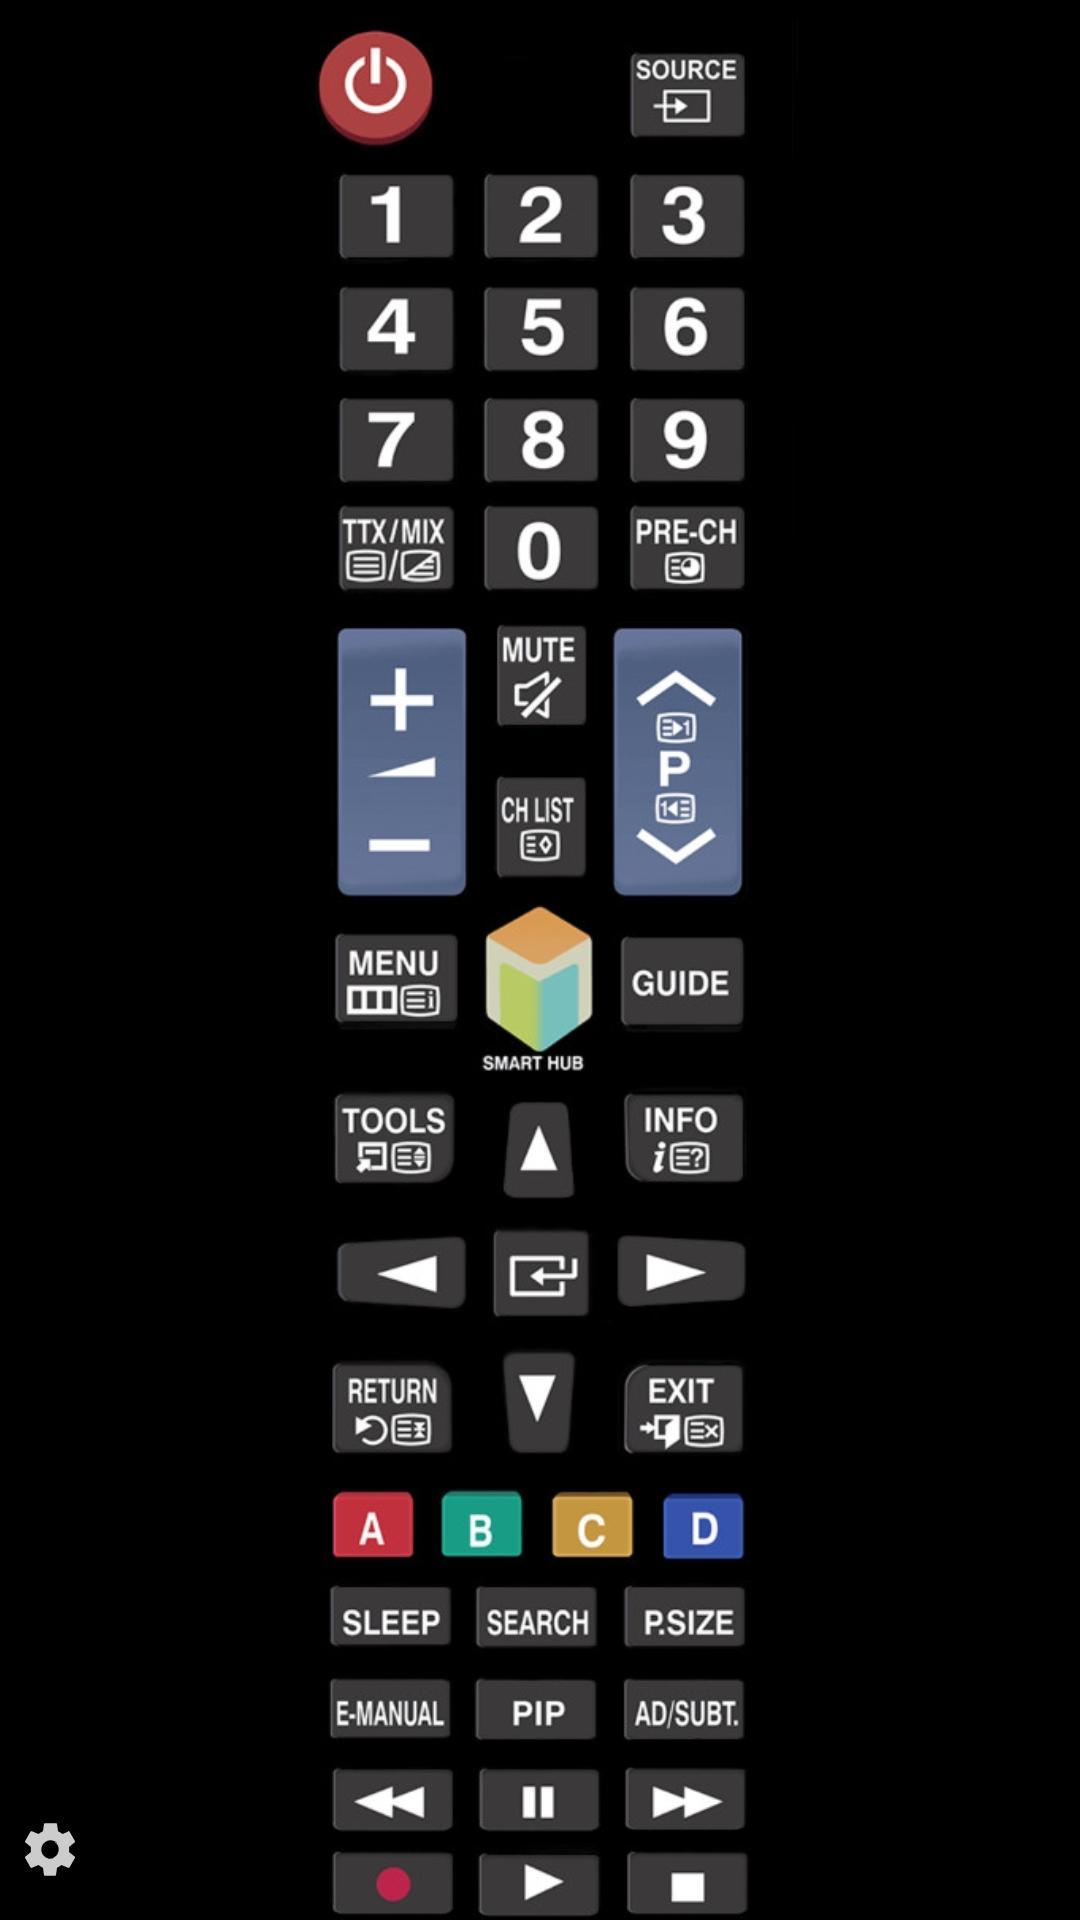 TV (Samsung) Remote Control for Android - APK Download